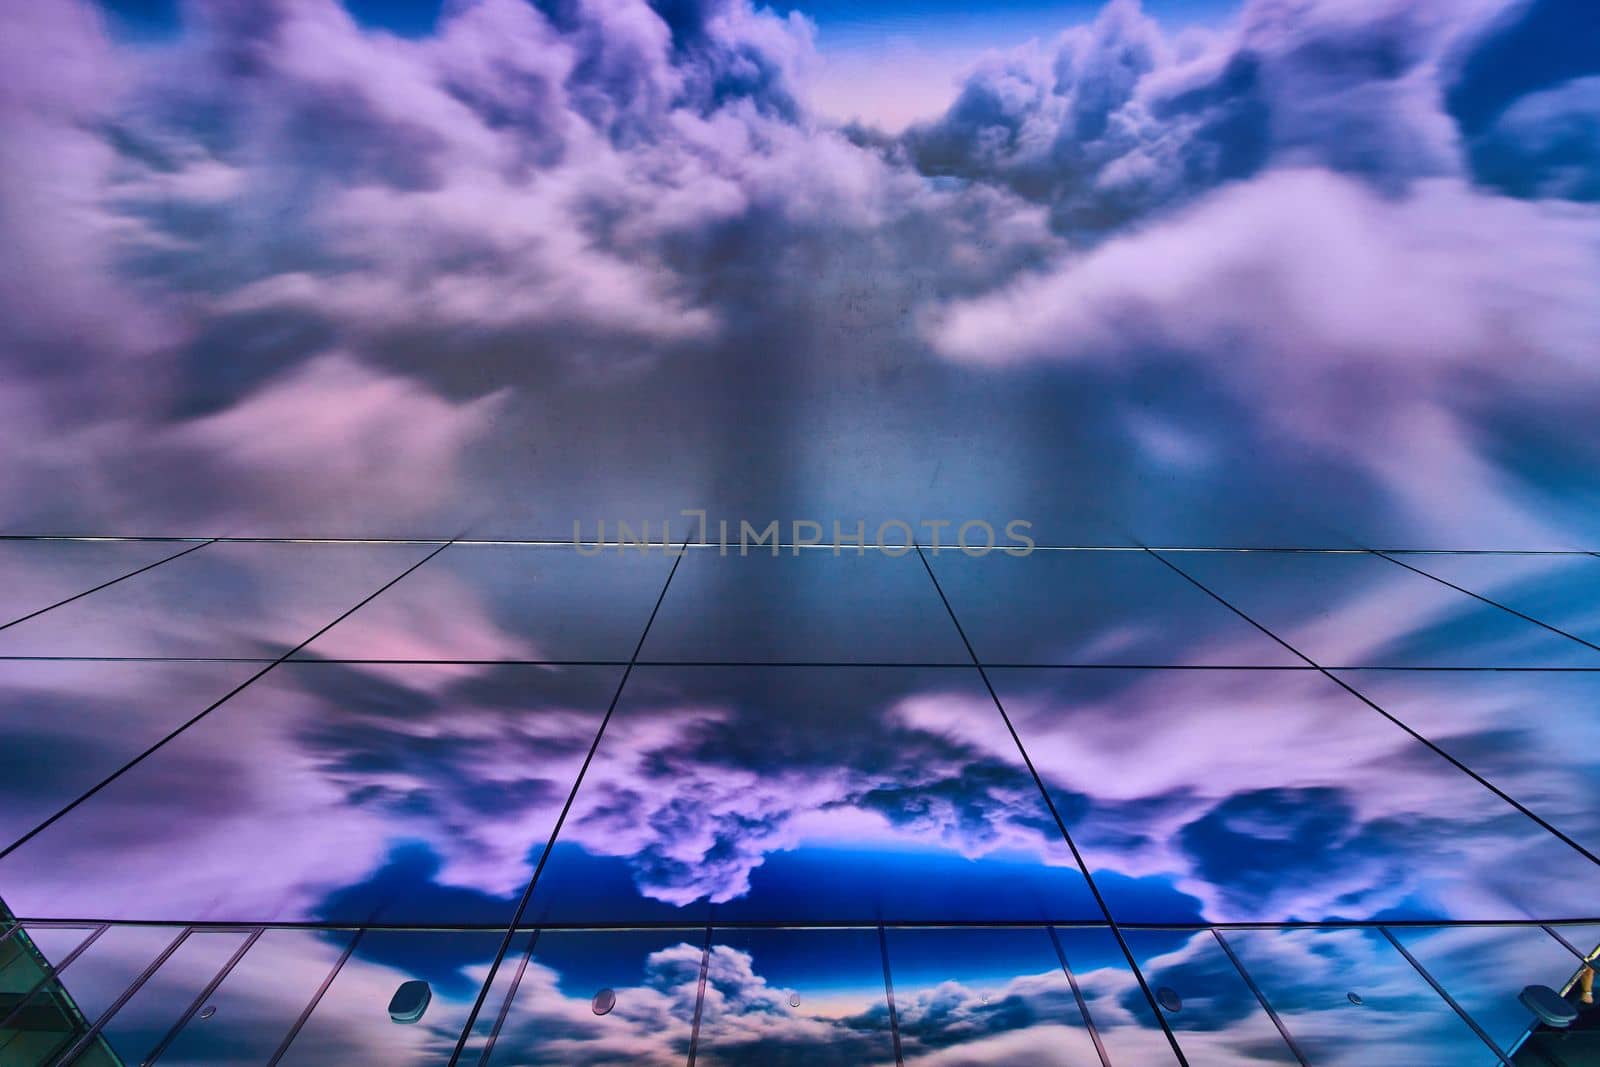 Mirror wall and augmented reality of storm clouds on glass by njproductions